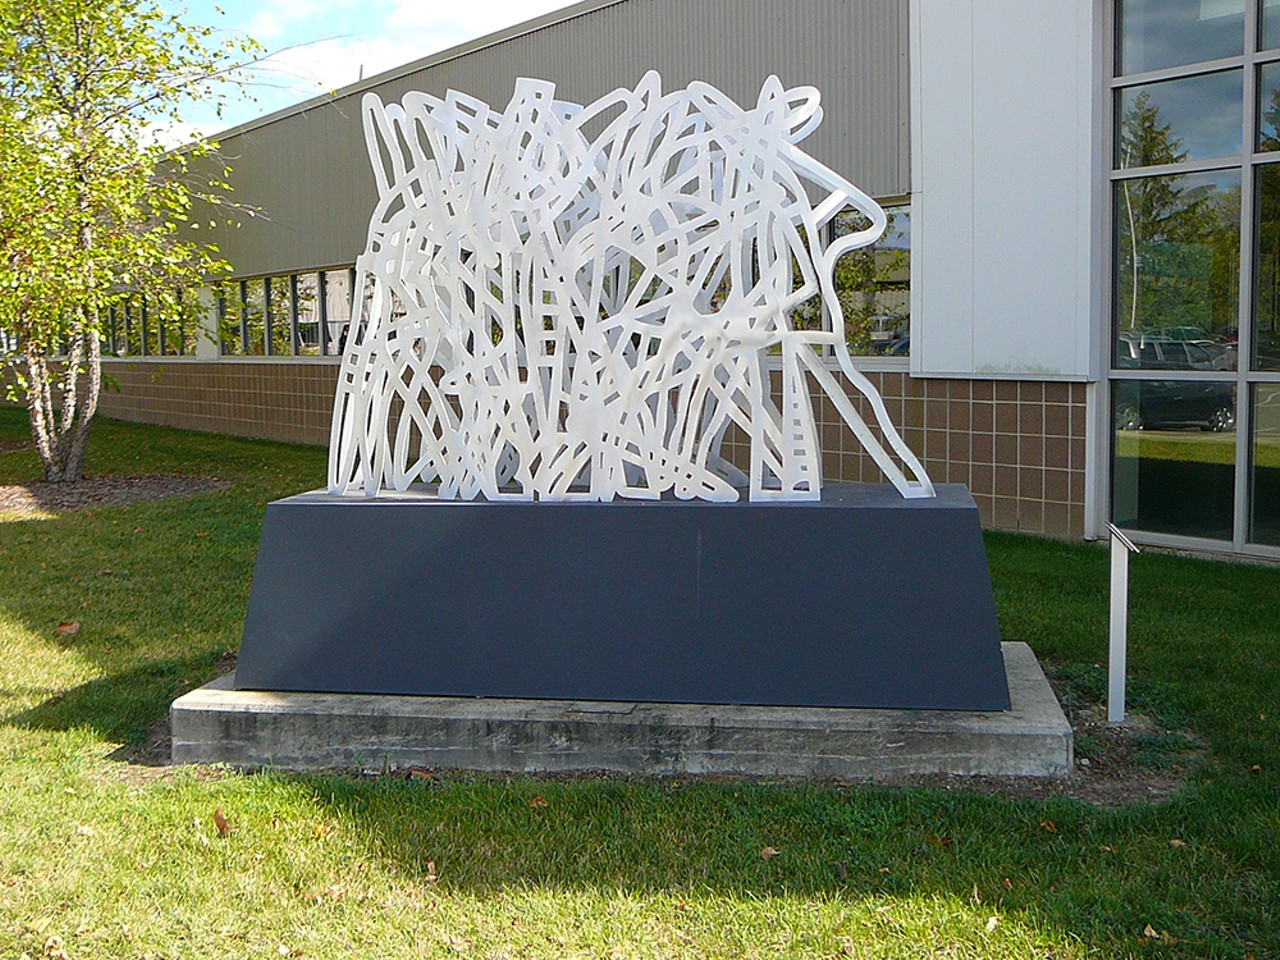 &#147;Unity III&#148;
Michigan State University, Energy and Automotive Research Building; 1497 Engineering Research Ct., East Lansing; egr.msu.edu
"In its purest sense the piece depicts people coming together and the inherent beauty of this synergy," MSU says of this 2007 piece.
Photo courtesy of MSU